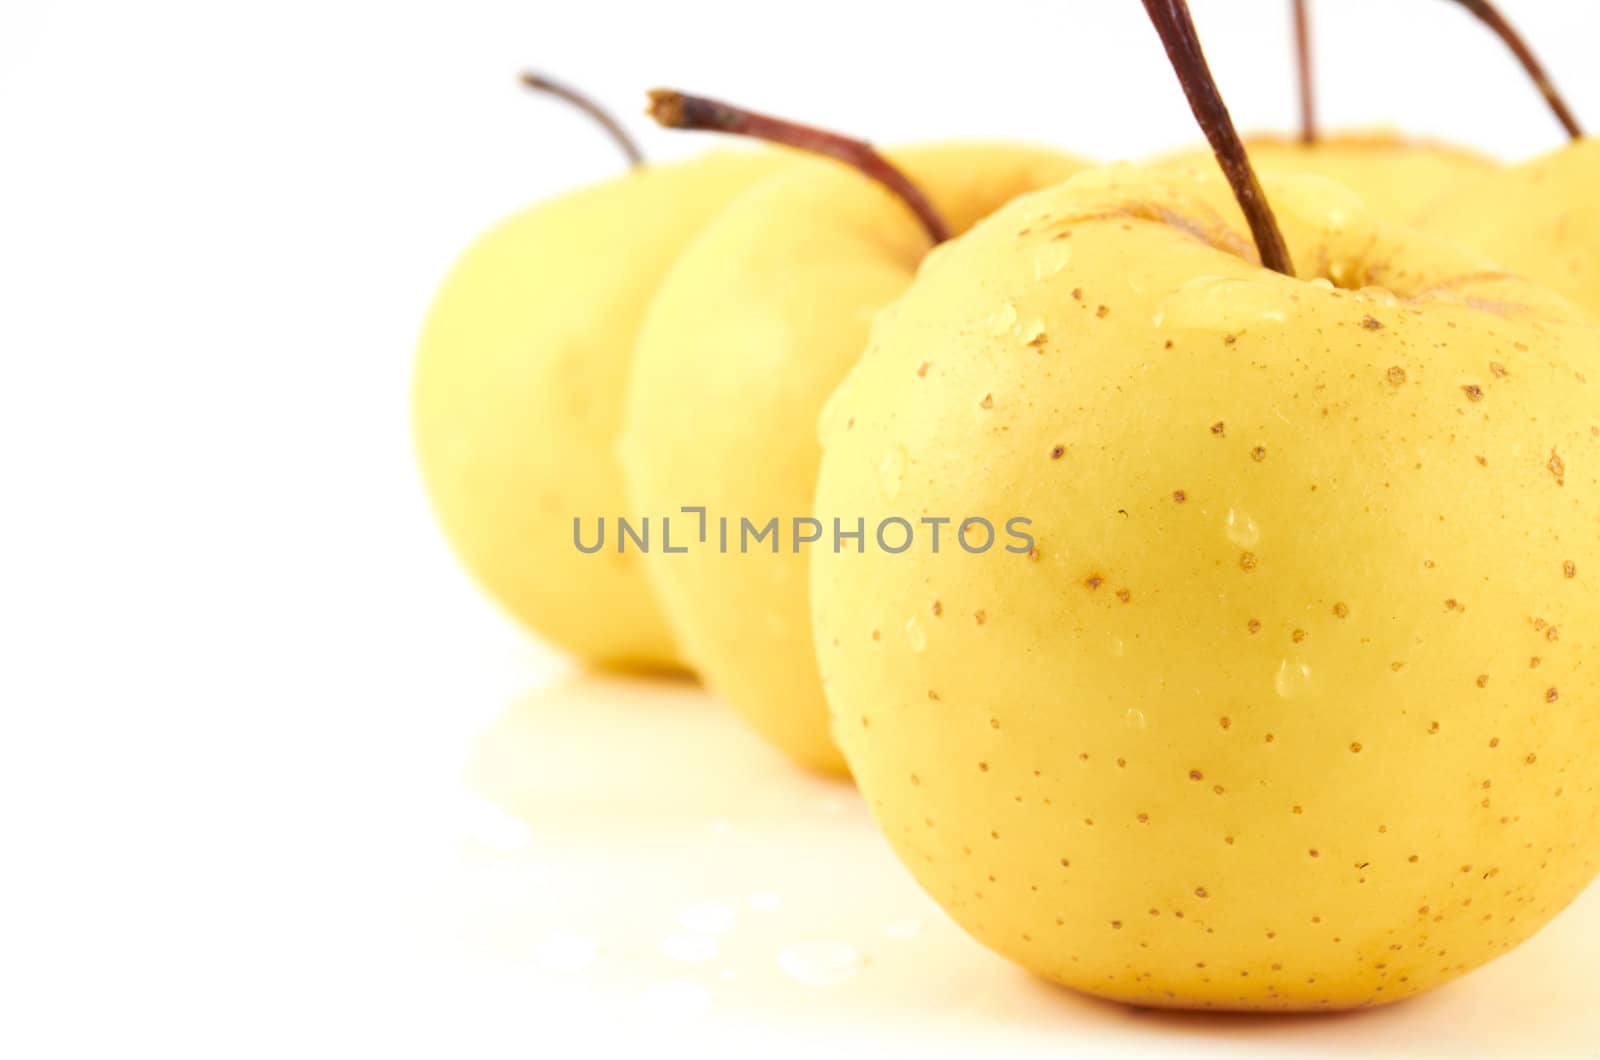 Juicy apples in drops of water on a white background